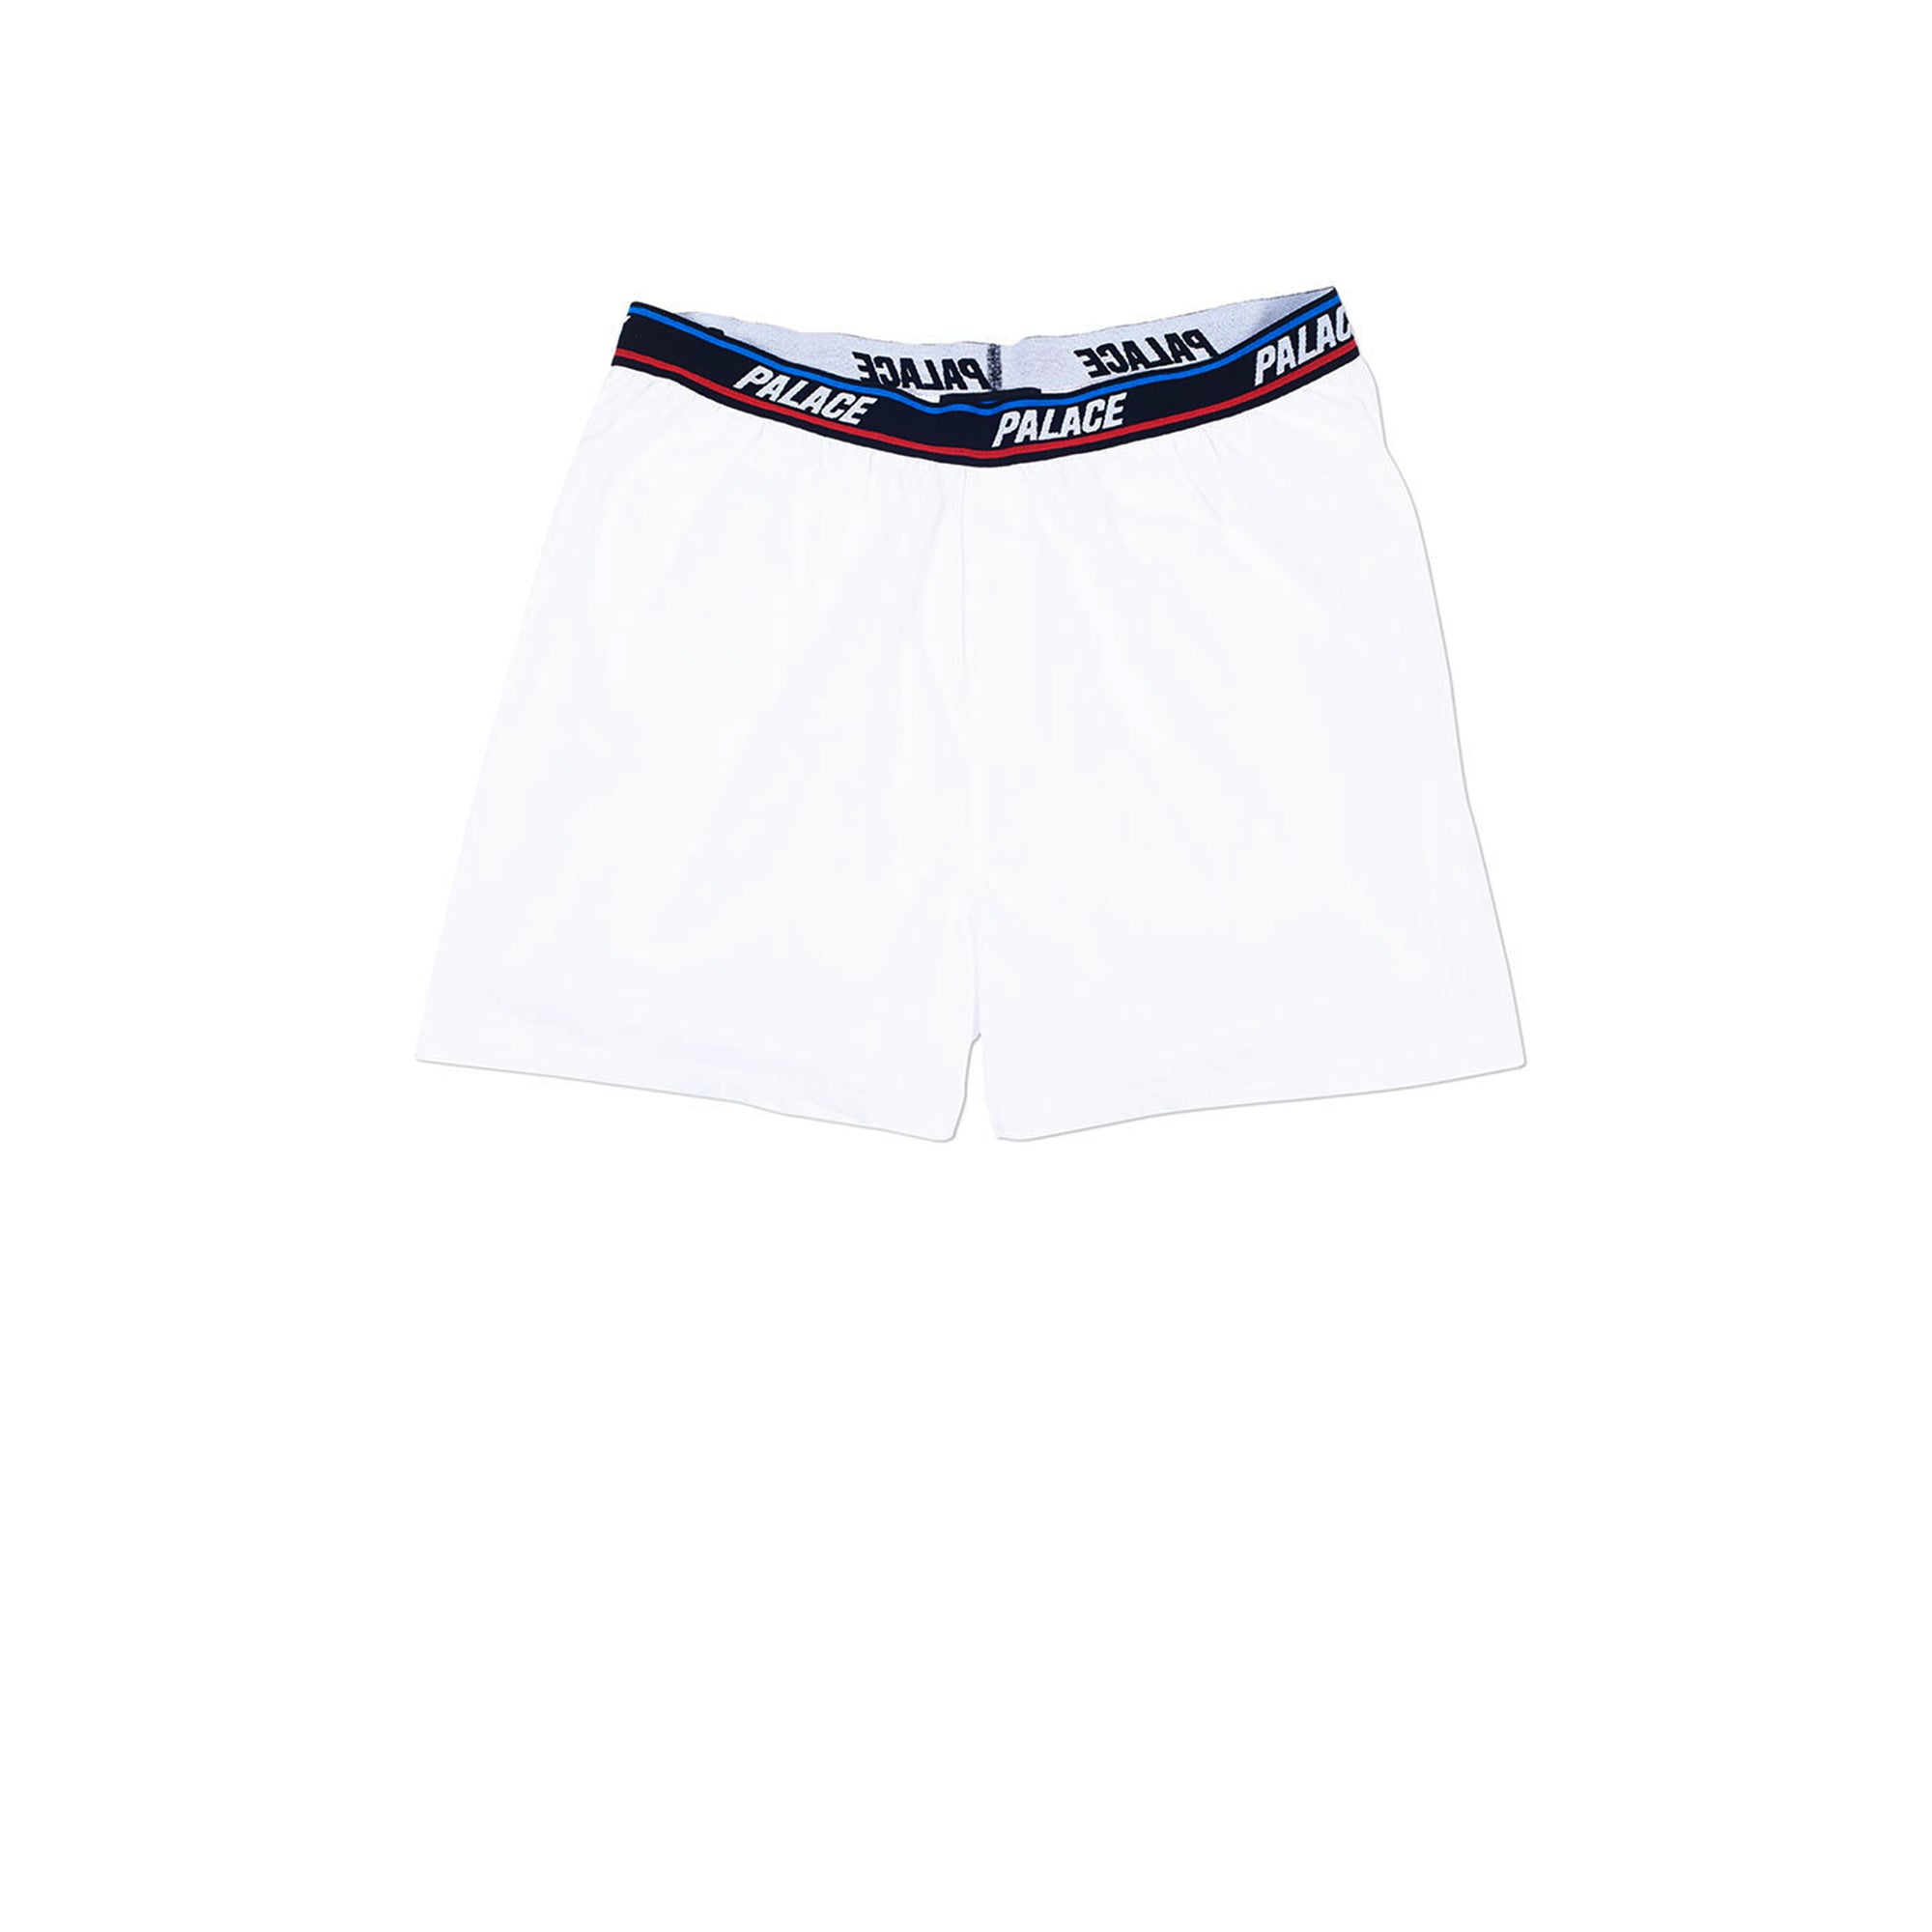 Palace - Men’s Basically A Pack Of Boxers - (Black/Natural) view 4